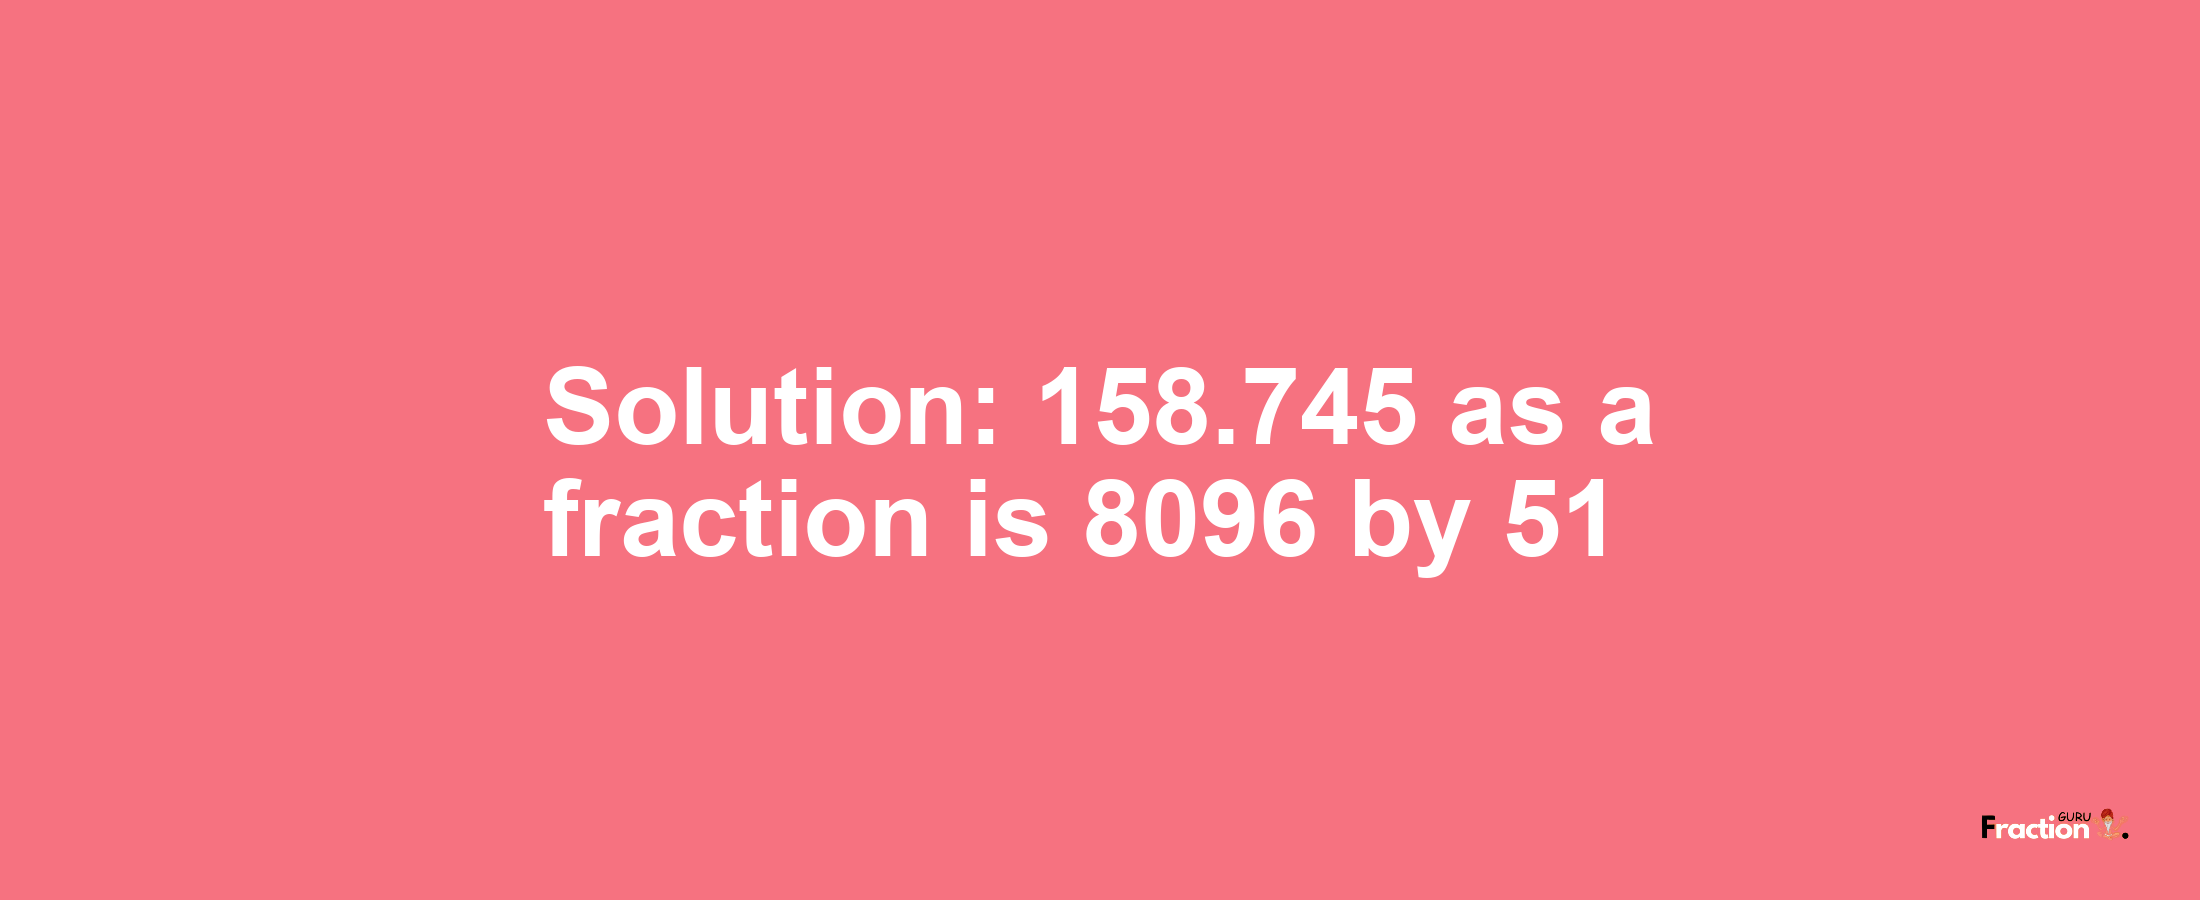 Solution:158.745 as a fraction is 8096/51